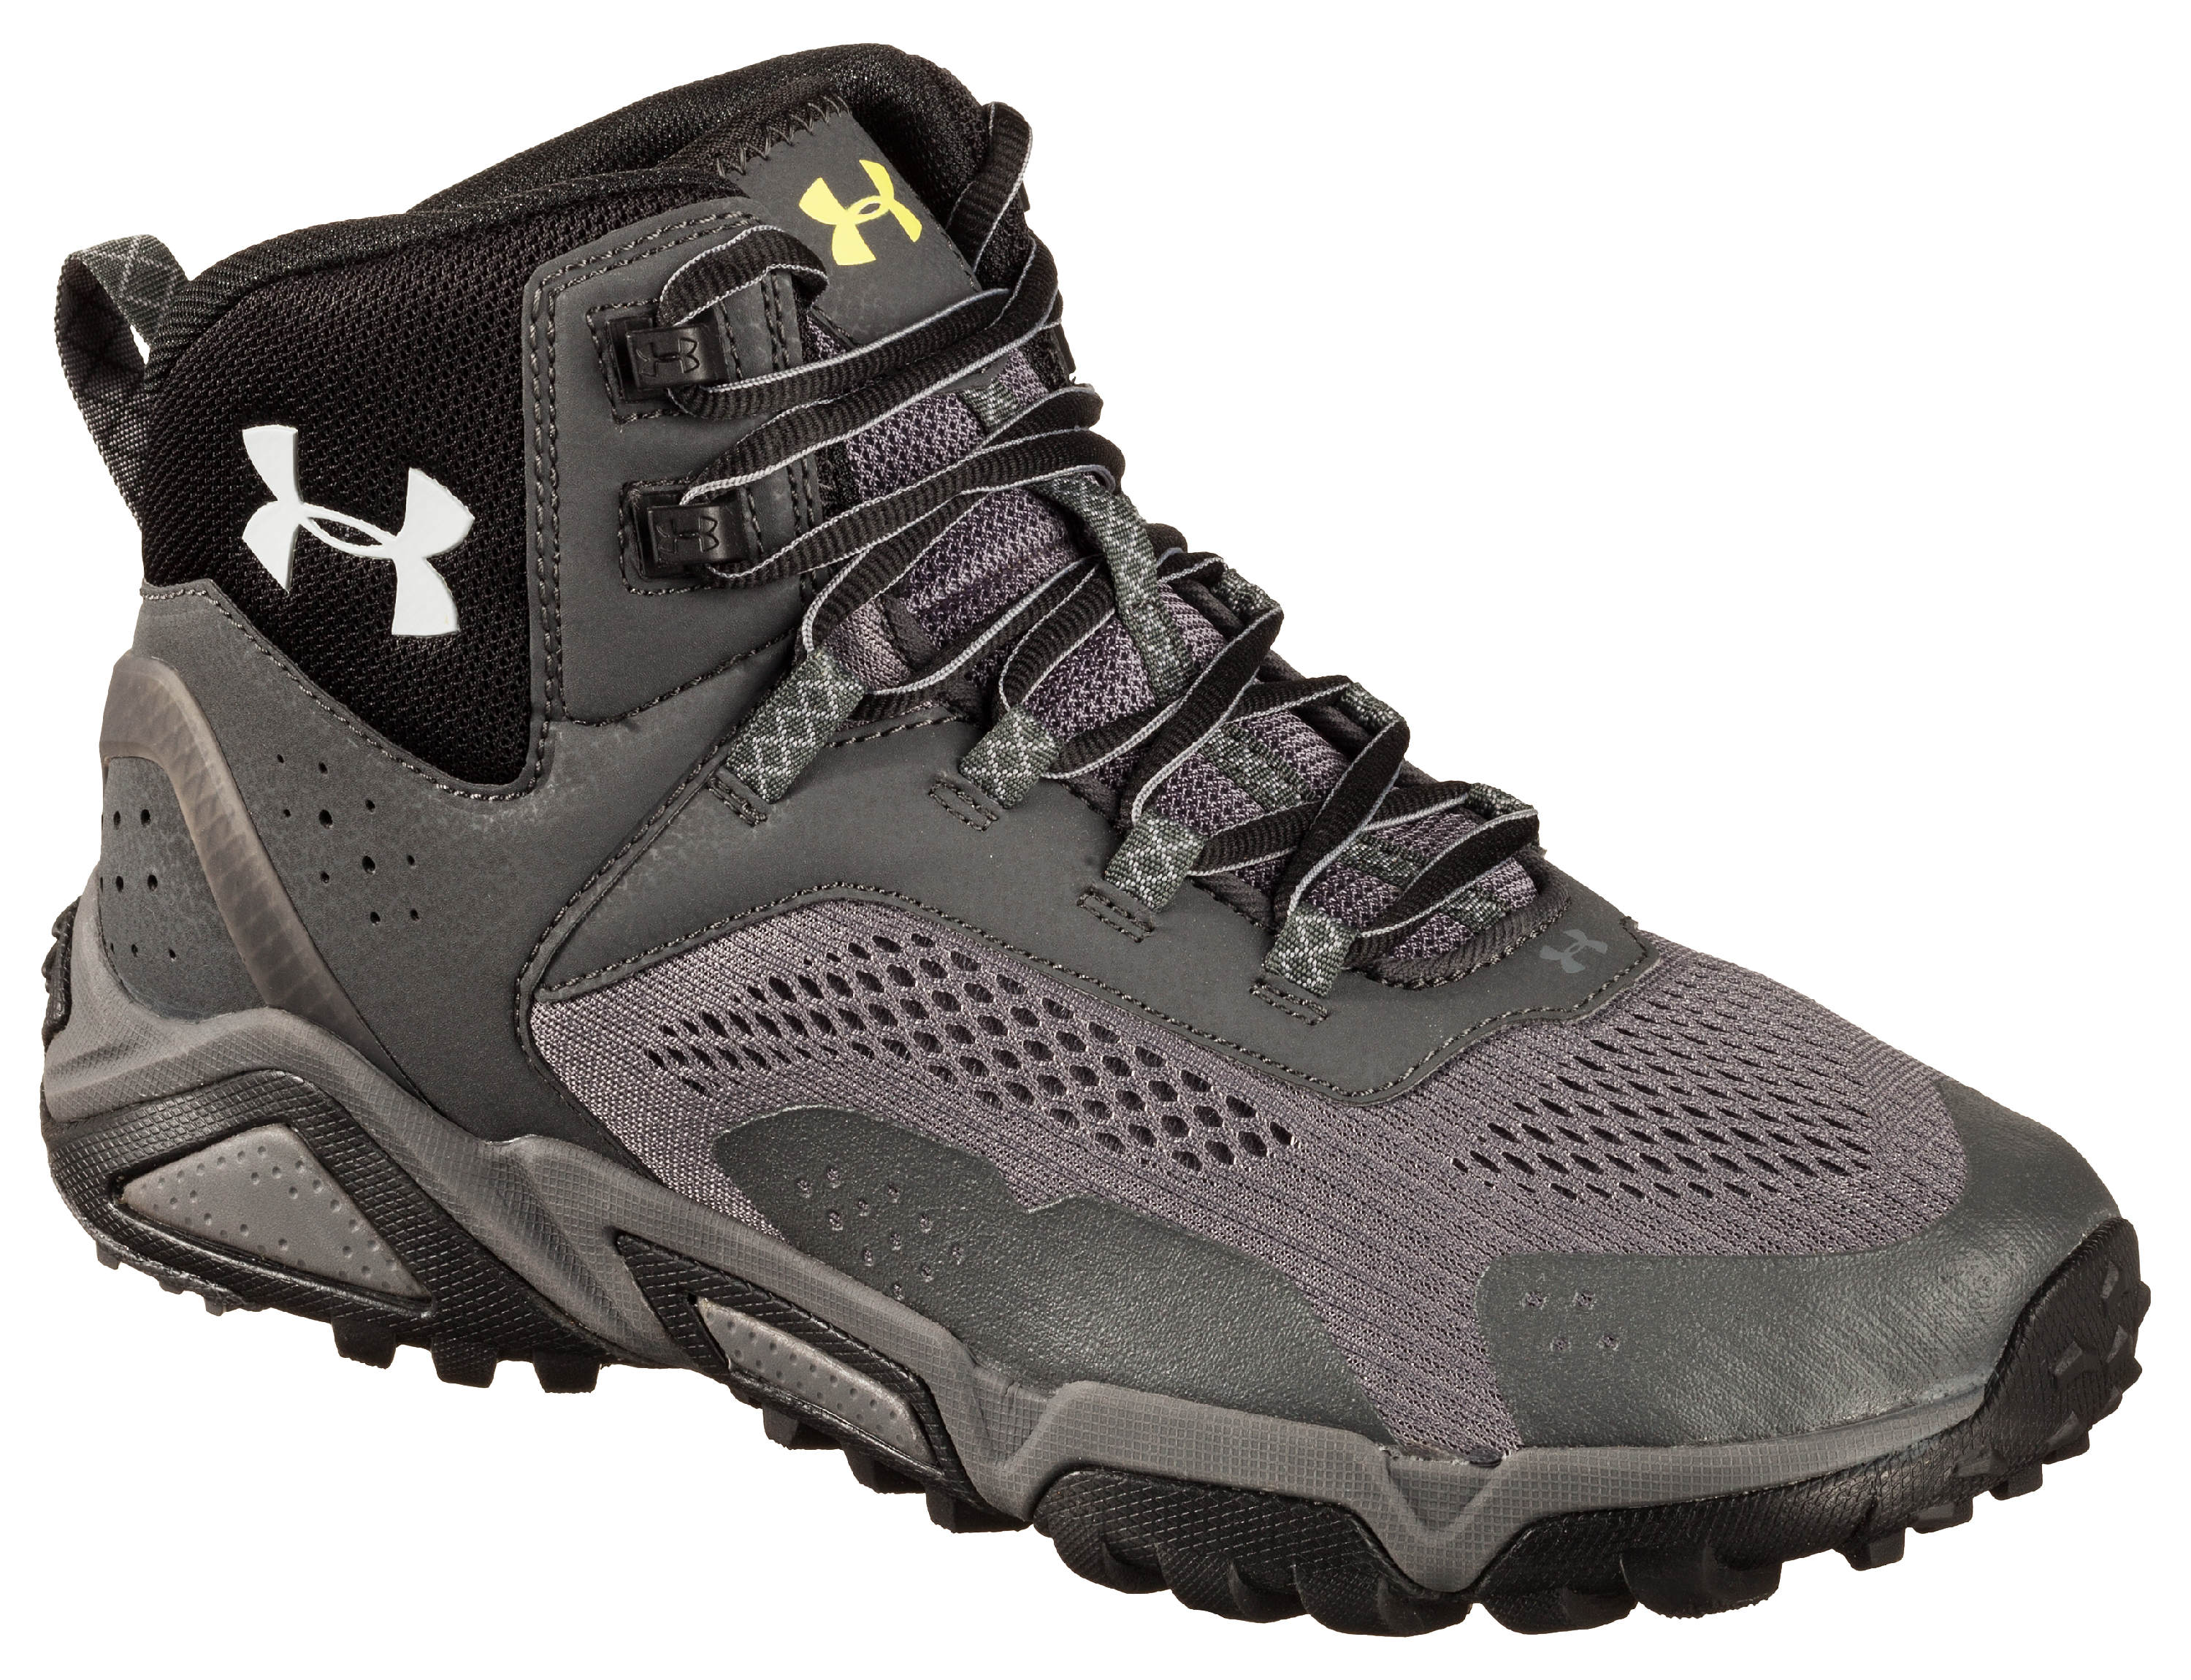 Under Armour Glenrock Mid Hiking Boots for Men | Bass Pro Shops